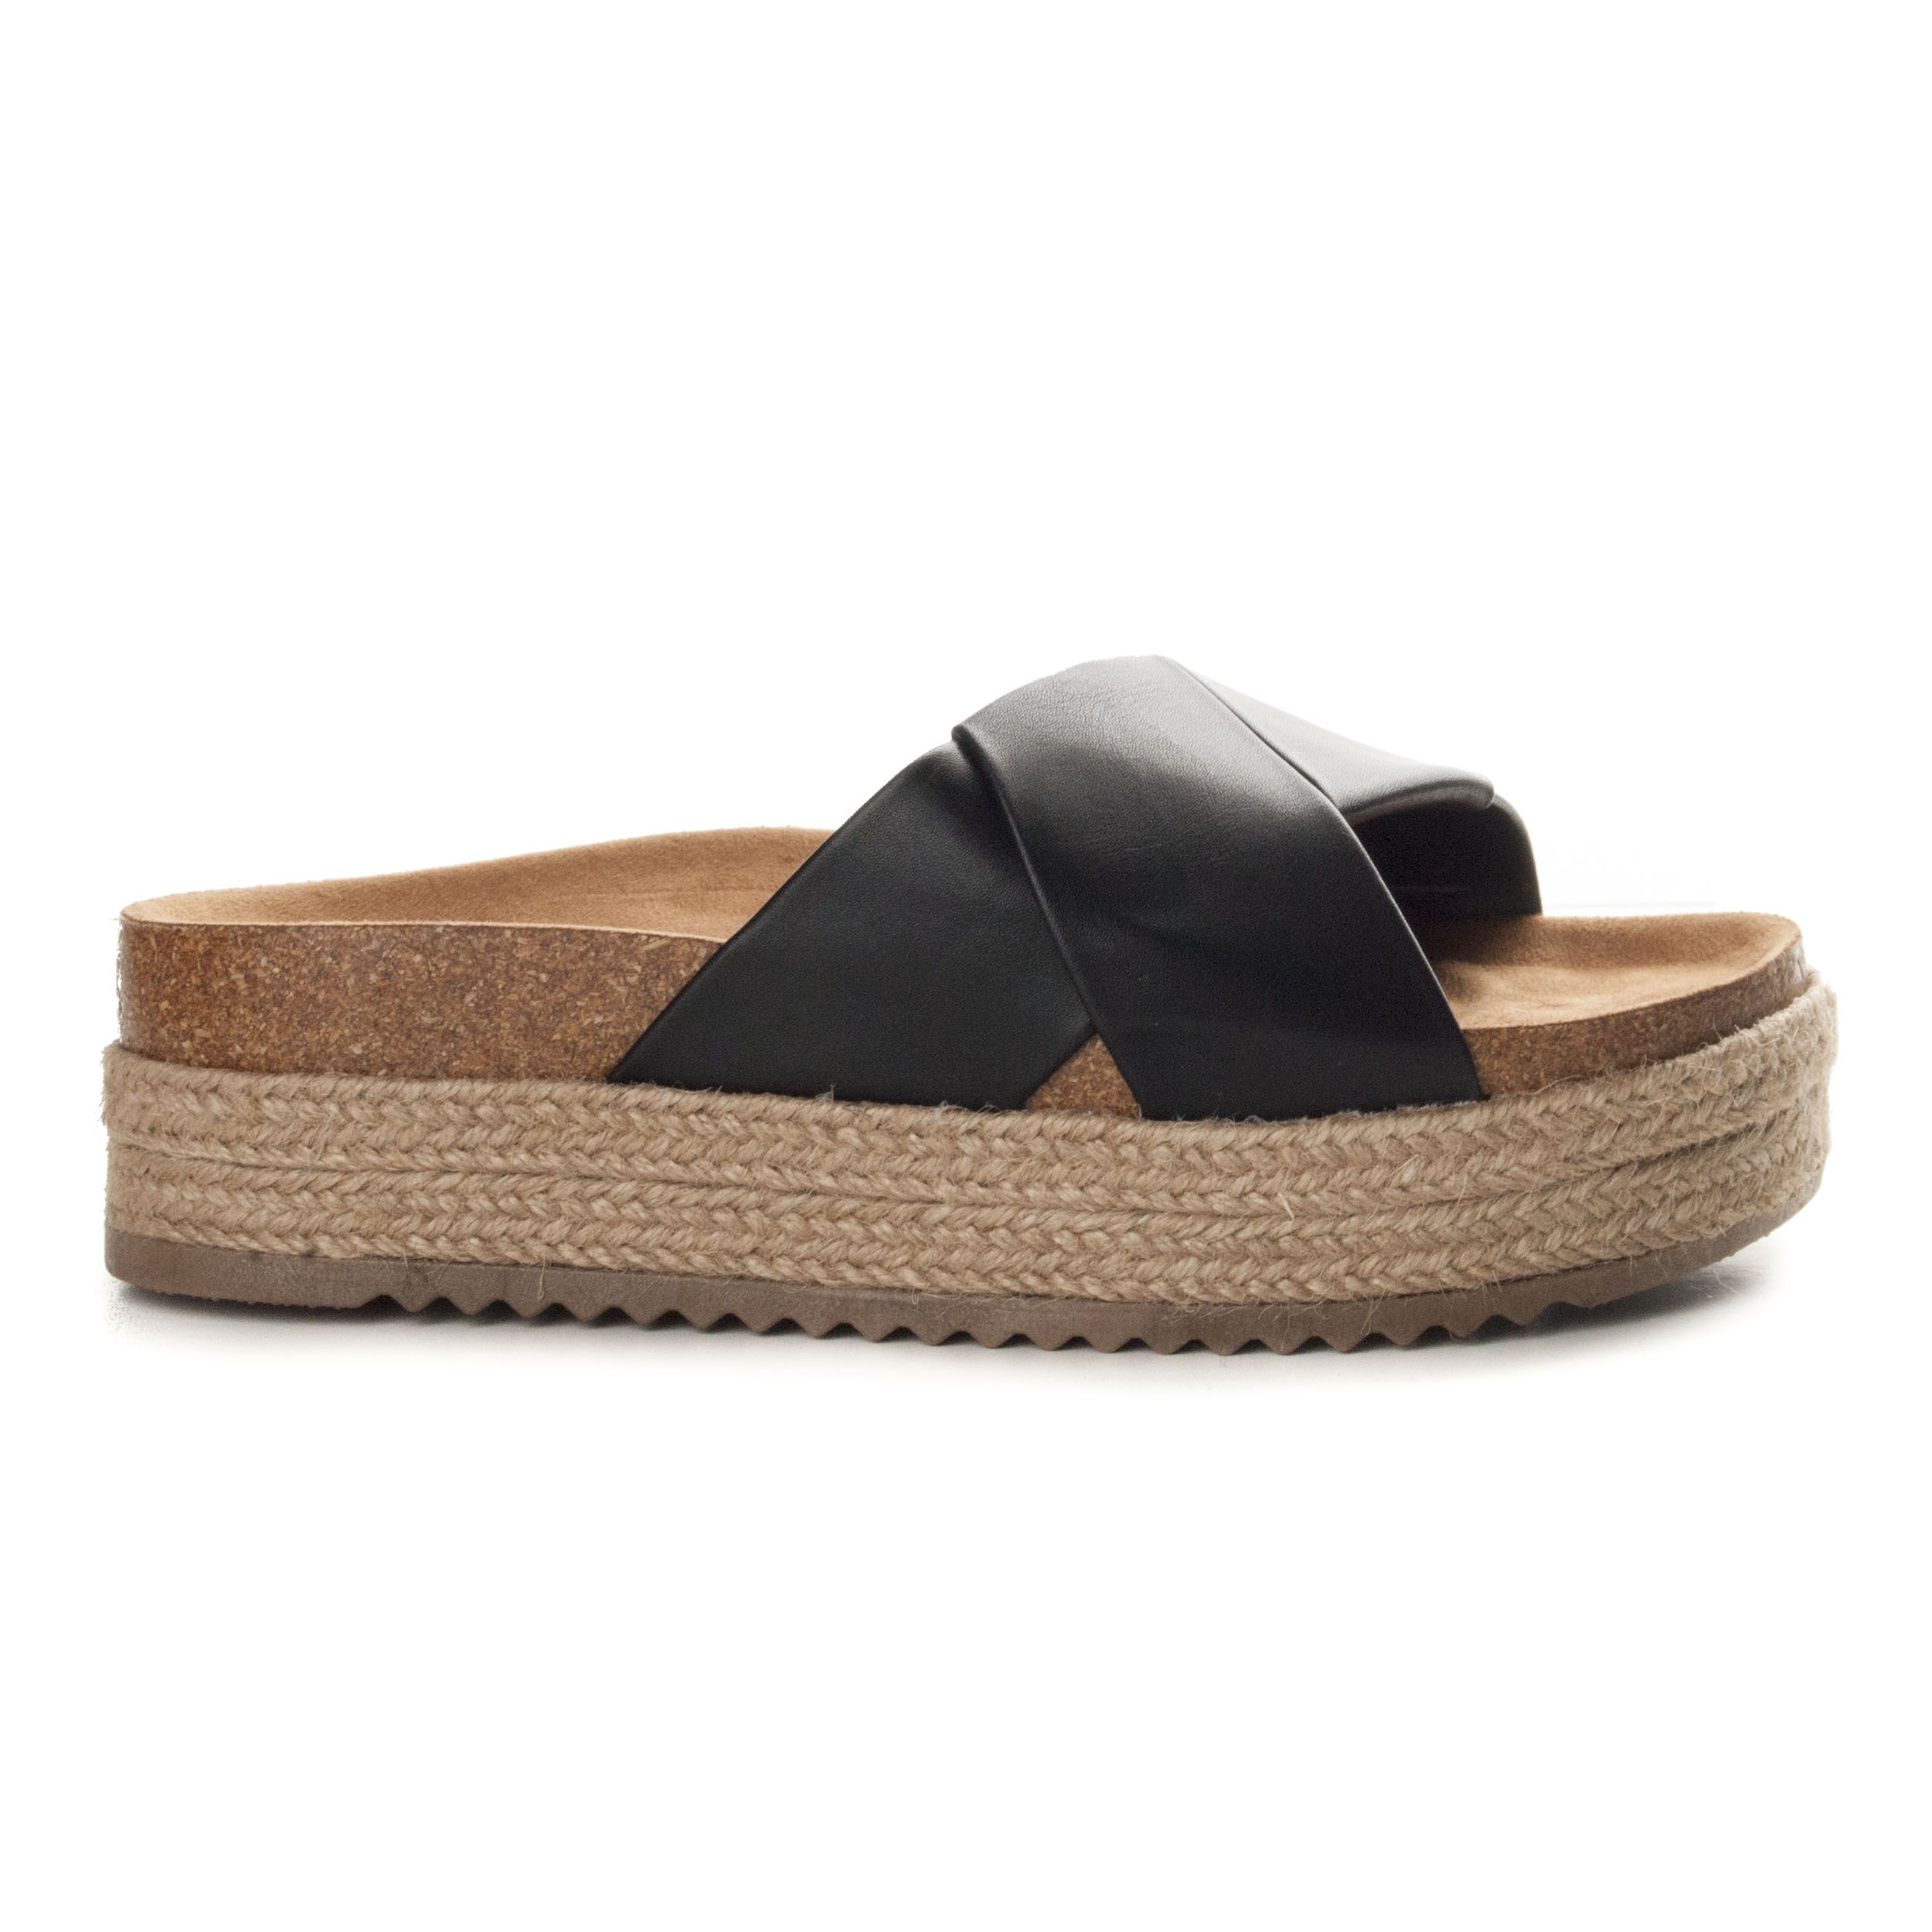 Sandal of esparto with soft suede plant, ideal for summer for its style and comfort. It consists of a platform, with the ideal height, for the day to day. With crossed strips simil skin. Trend this summer. Sandal that can not miss this summer in your closet.